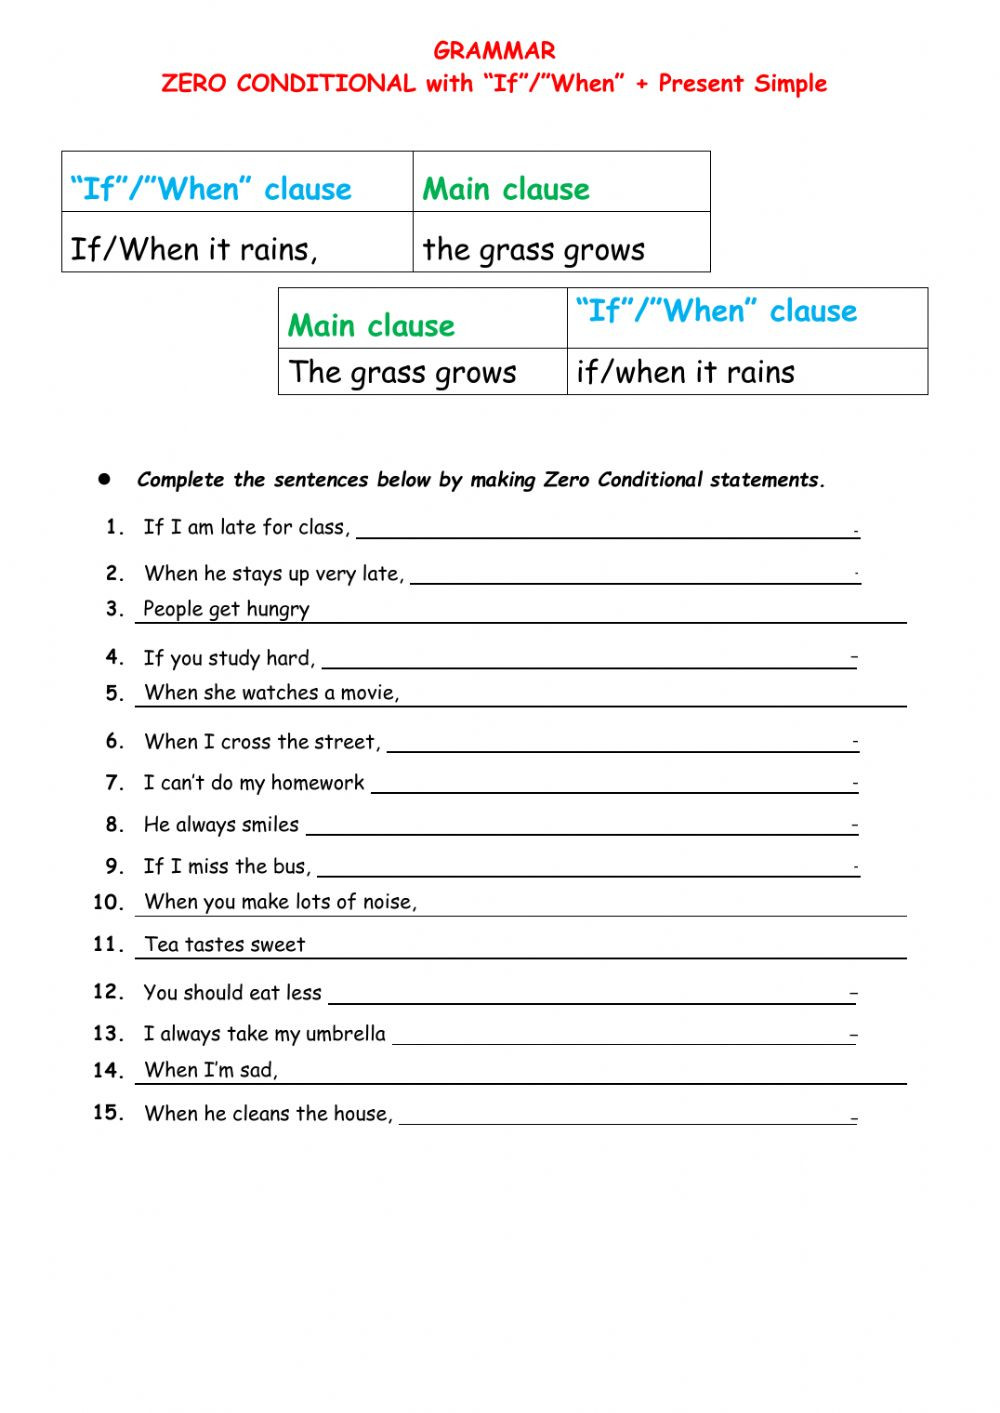 Conditional Statements Worksheet with Answers Zero Conditional Interactive Worksheet